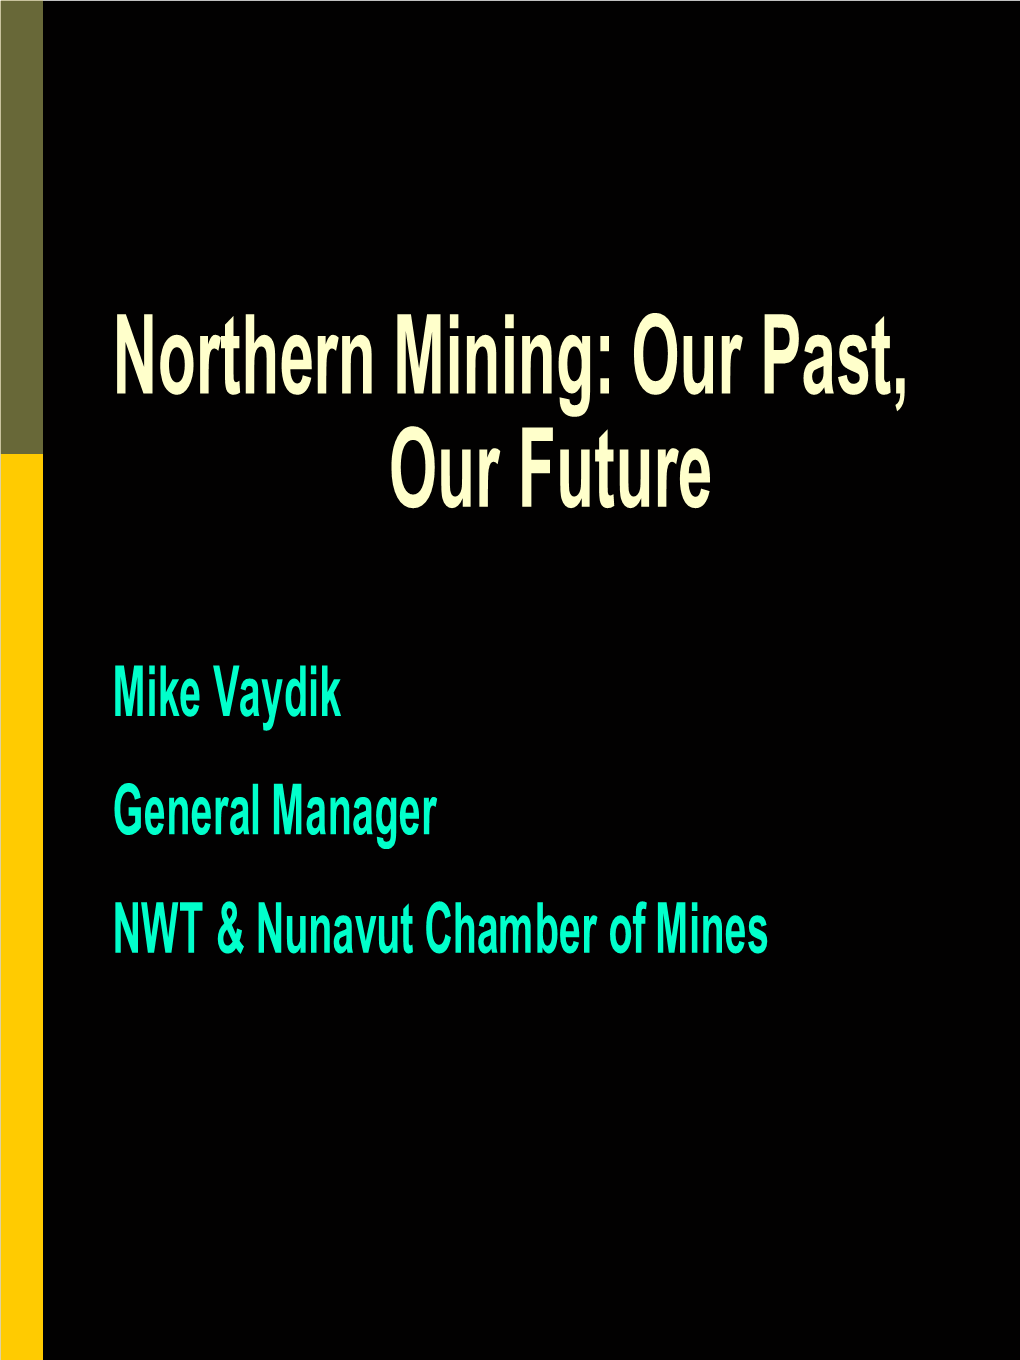 Northern Mining: Our Past, Our Future